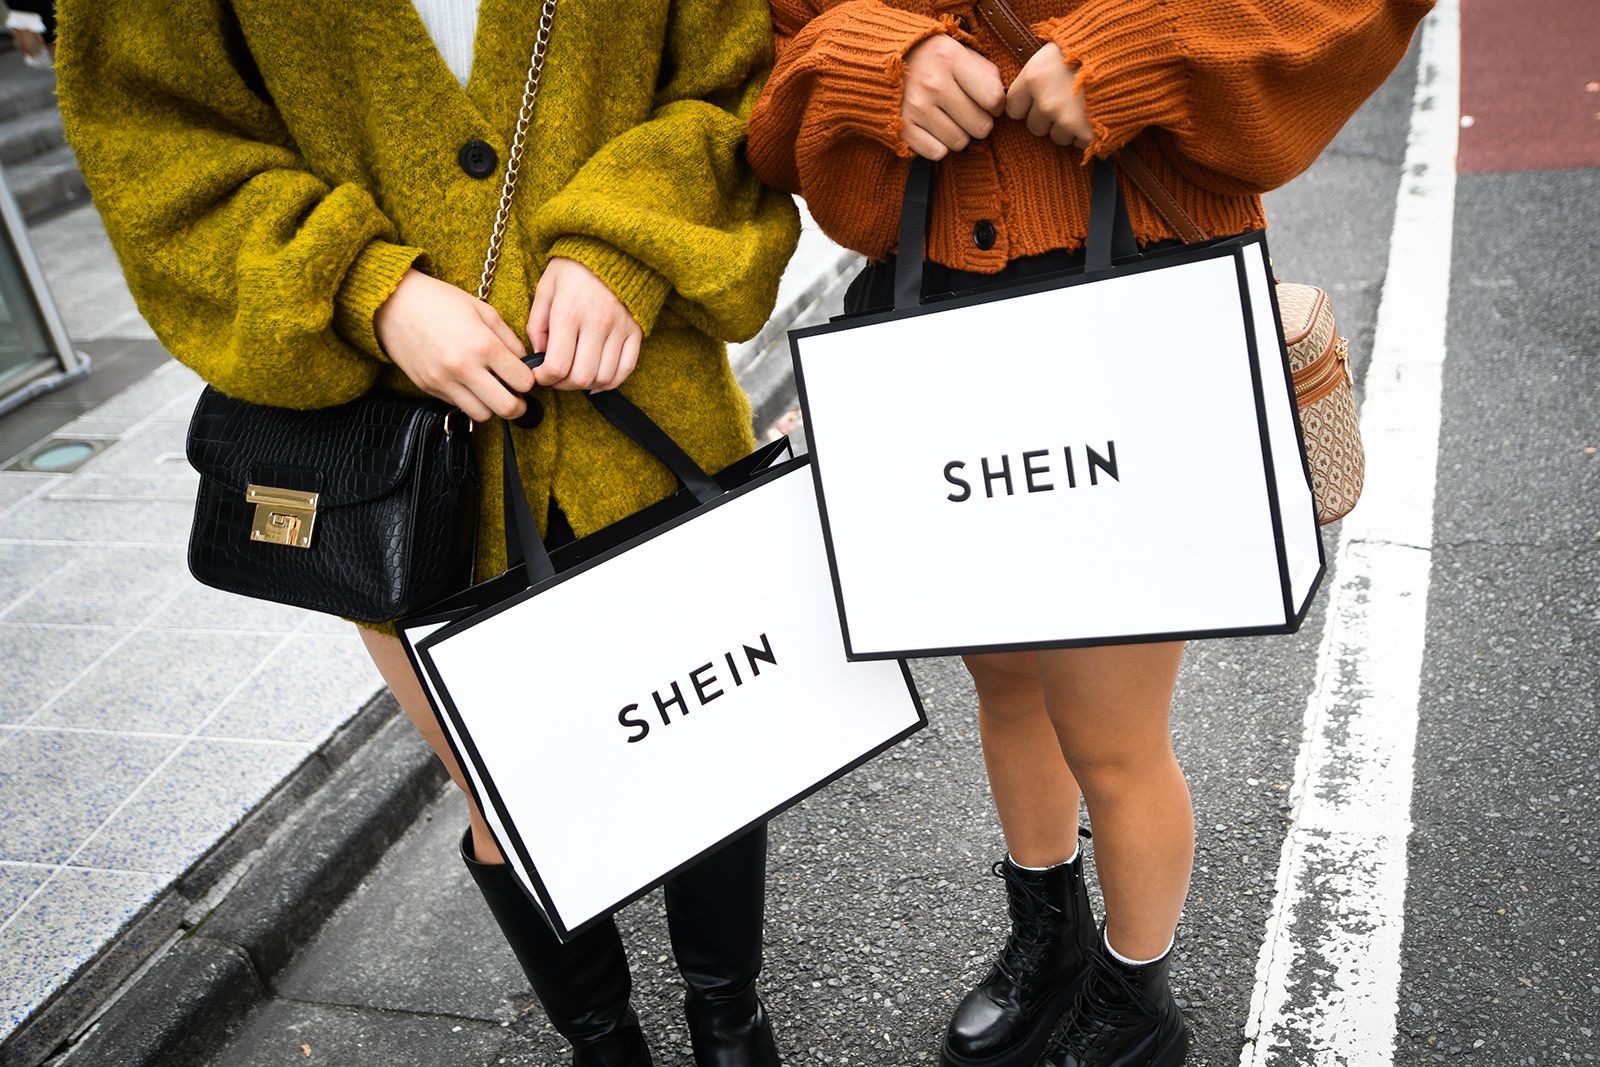 Prime Day is bringing China's Shein back to India